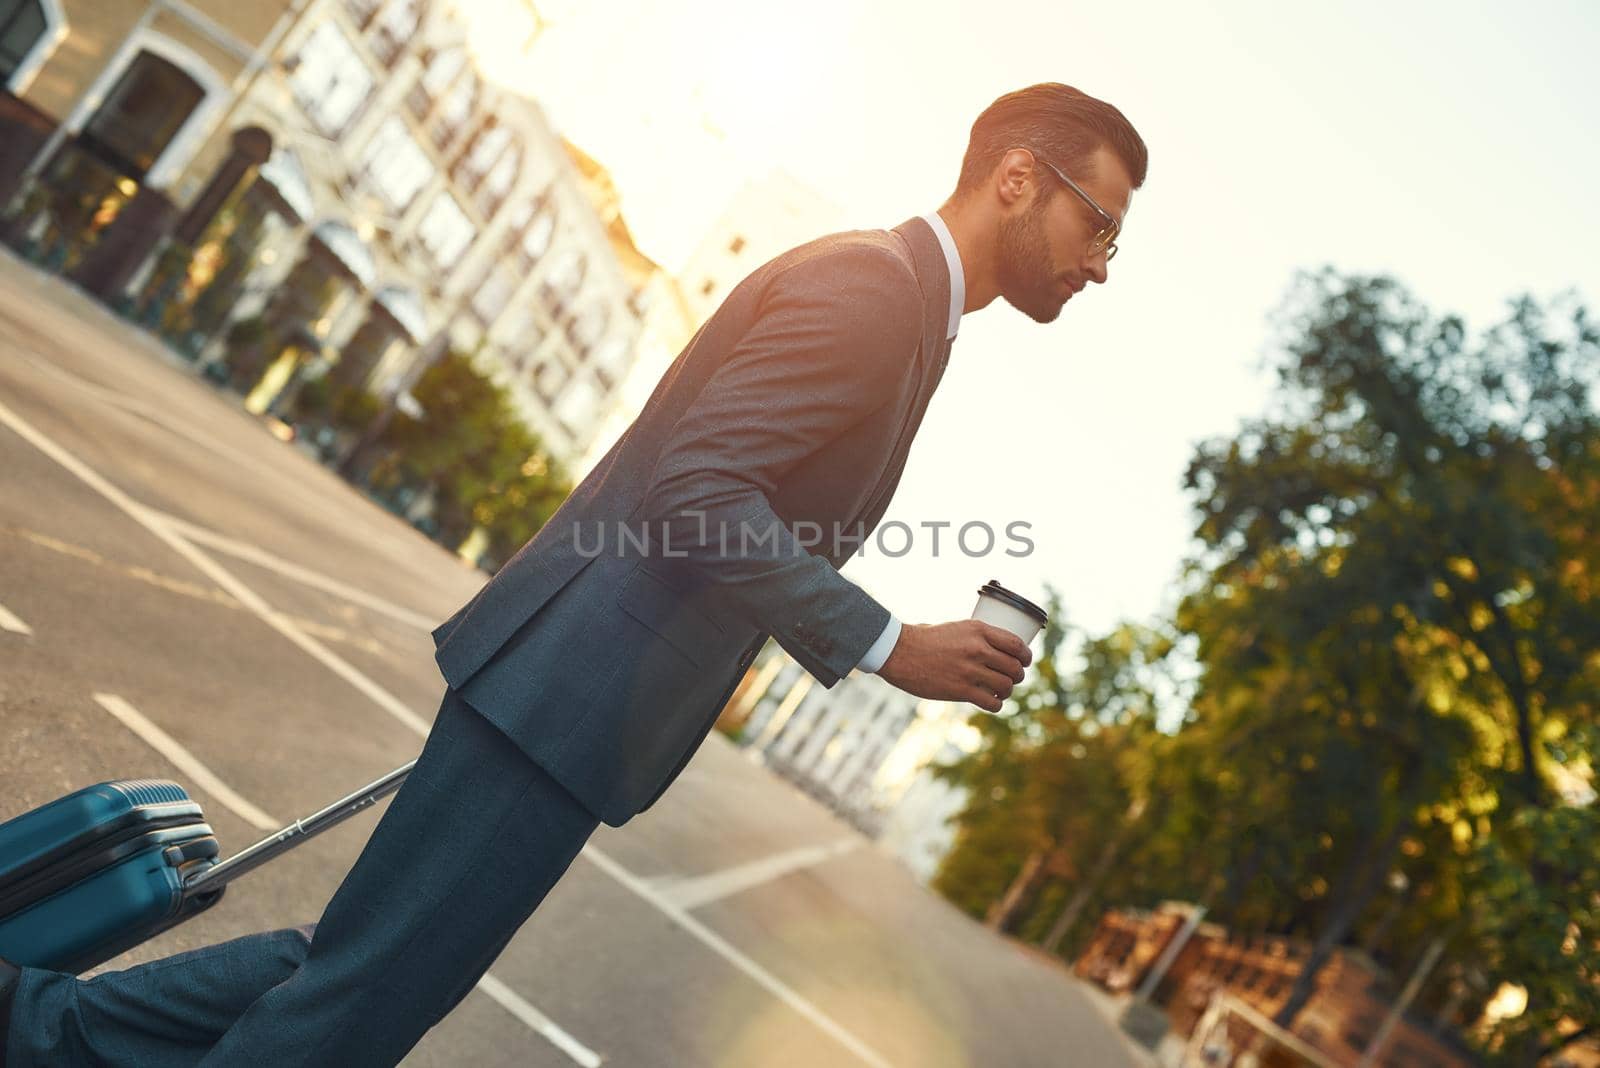 Morning city. Full length of young and handsome bearded businessman in suit pulling his luggage and holding cup of coffee while walking outdoors. Travelling. Business concept